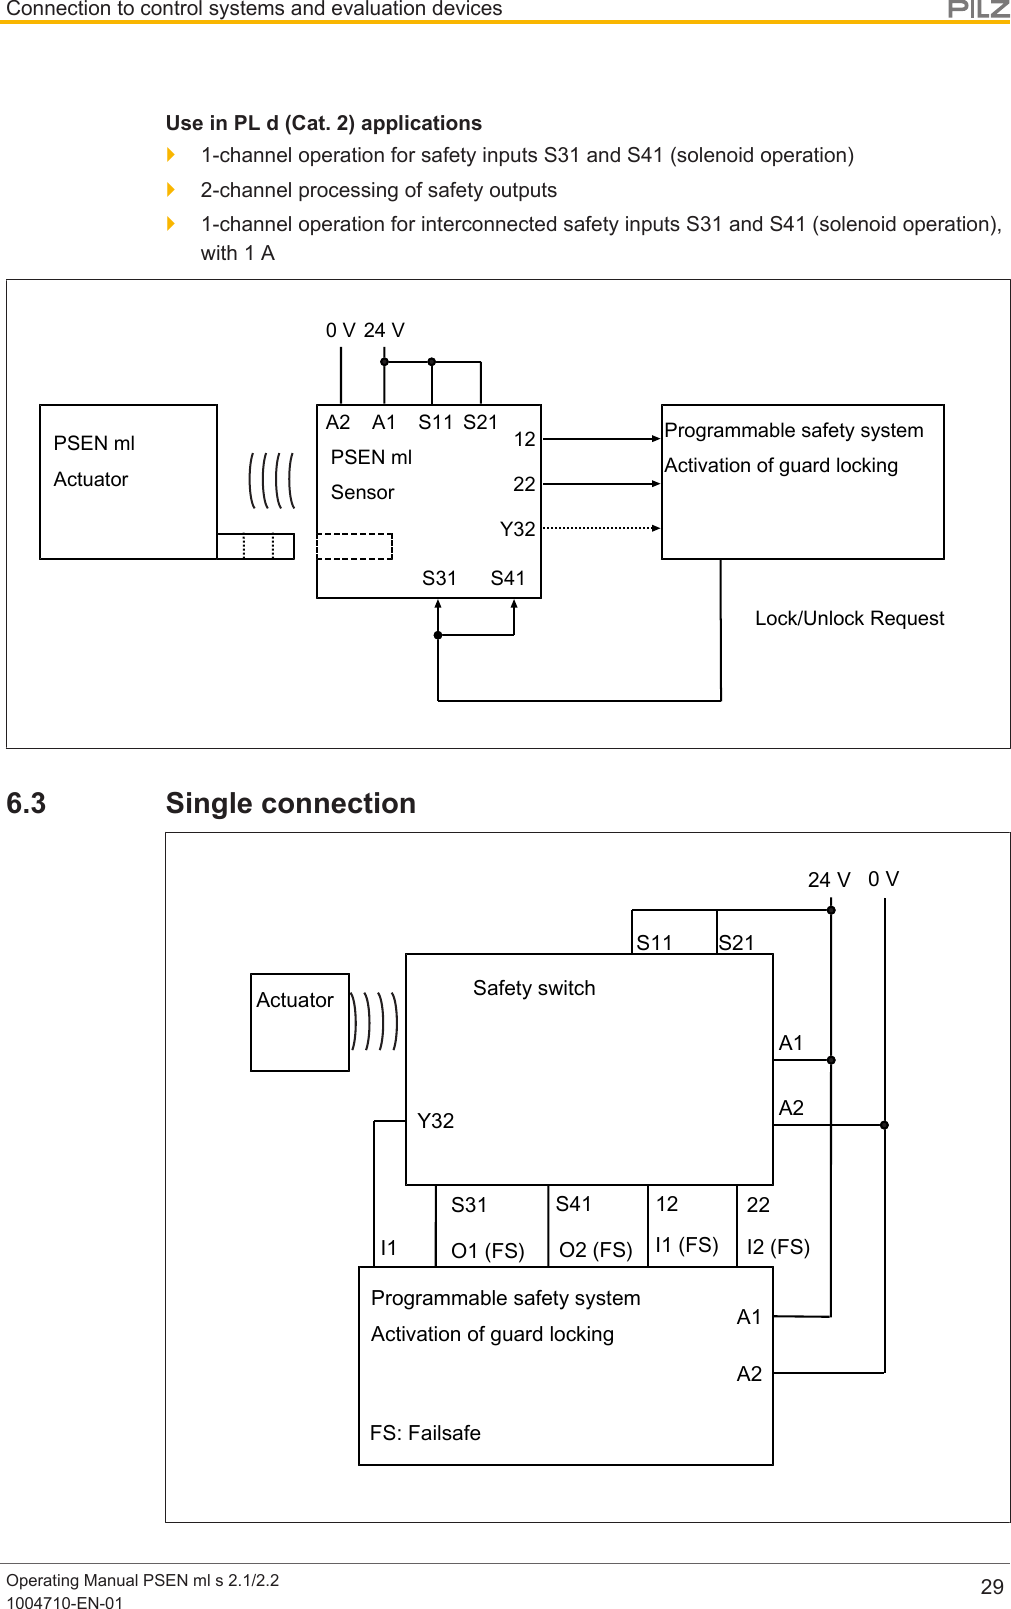 Connection to control systems and evaluation devicesOperating Manual PSEN ml s 2.1/2.21004710-EN-01 29Use in PL d (Cat. 2) applications}1-channel operation for safety inputs S31 and S41 (solenoid operation)}2-channel processing of safety outputs}1-channel operation for interconnected safety inputs S31 and S41 (solenoid operation),with 1AProgrammable safety systemActivation of guard lockingPSEN mlActuator 22Y32S31 S4112PSEN mlSensorLock/Unlock RequestA1A224 V0 VS11 S216.3 Single connection24 V 0 VA1A212 22I2 (FS)I1 (FS)FS: FailsafeA1A2S31 S41Y32O2 (FS)O1 (FS)I1S11 S21Actuator Safety switchProgrammable safety systemActivation of guard locking